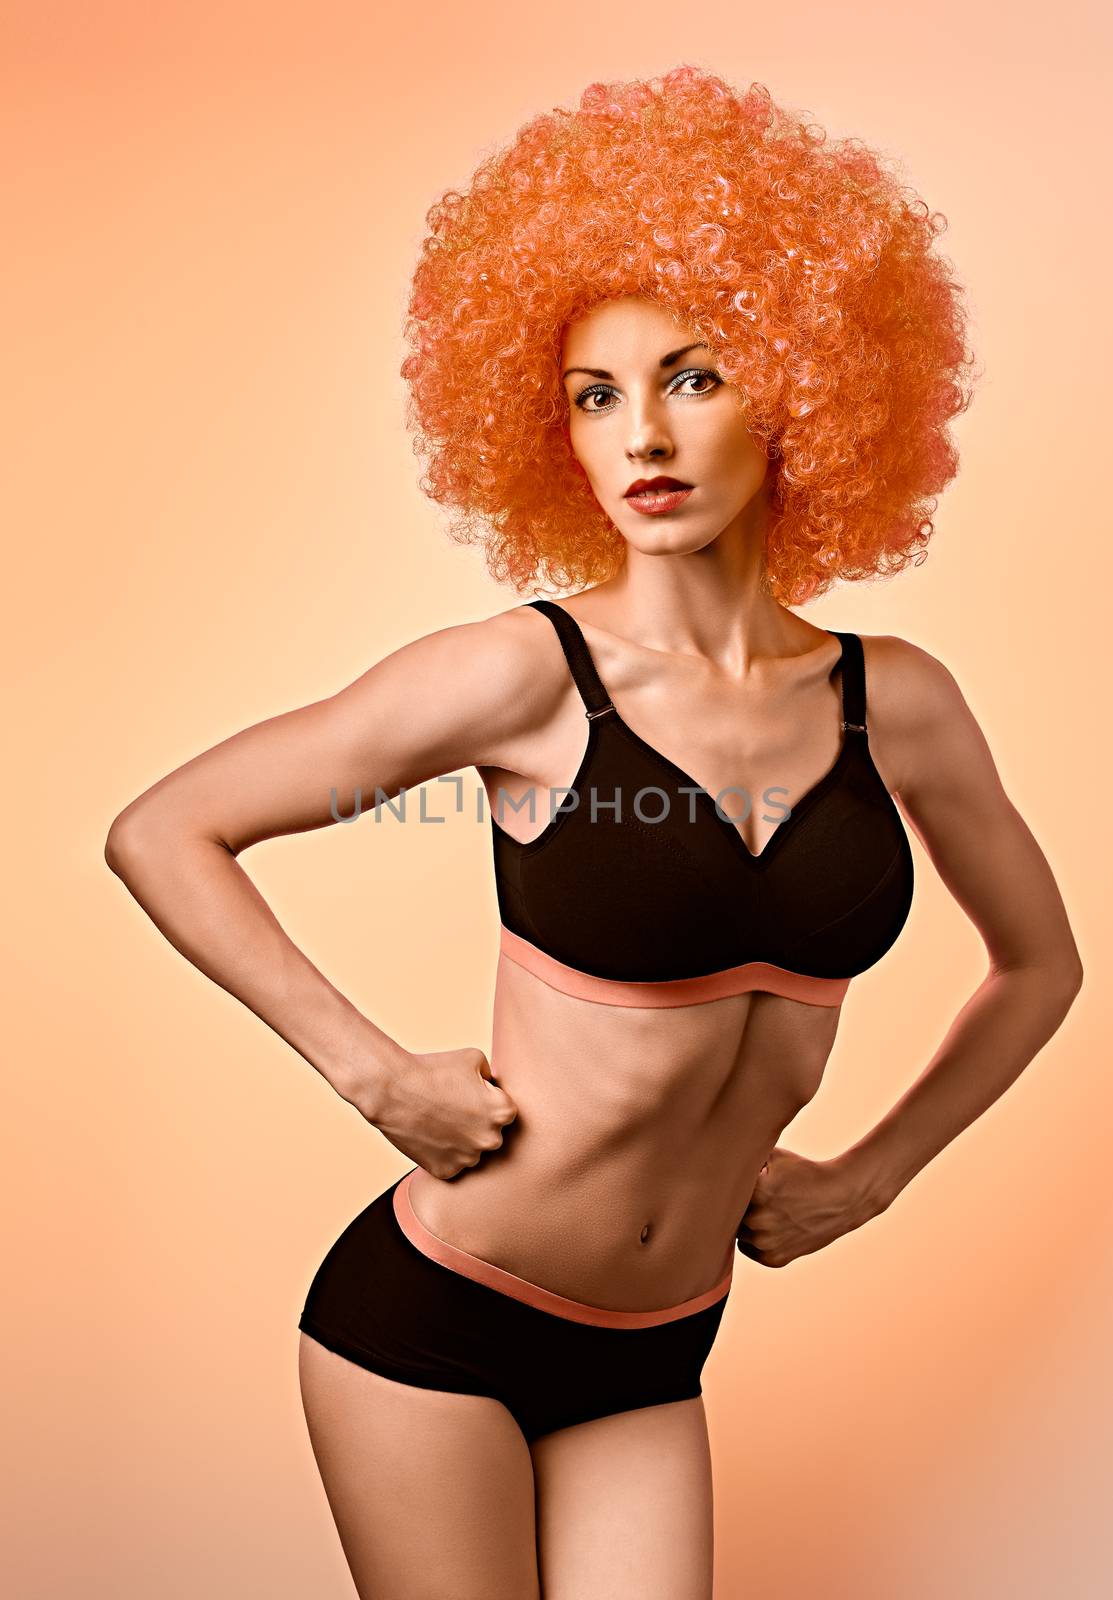 Beauty fashion. Fitness woman, unusual look. Sexy athletic body, people. Provocative attractive girl posing in trendy sport bra, shorts with afro hairstyle, orange background, copyspace, toned